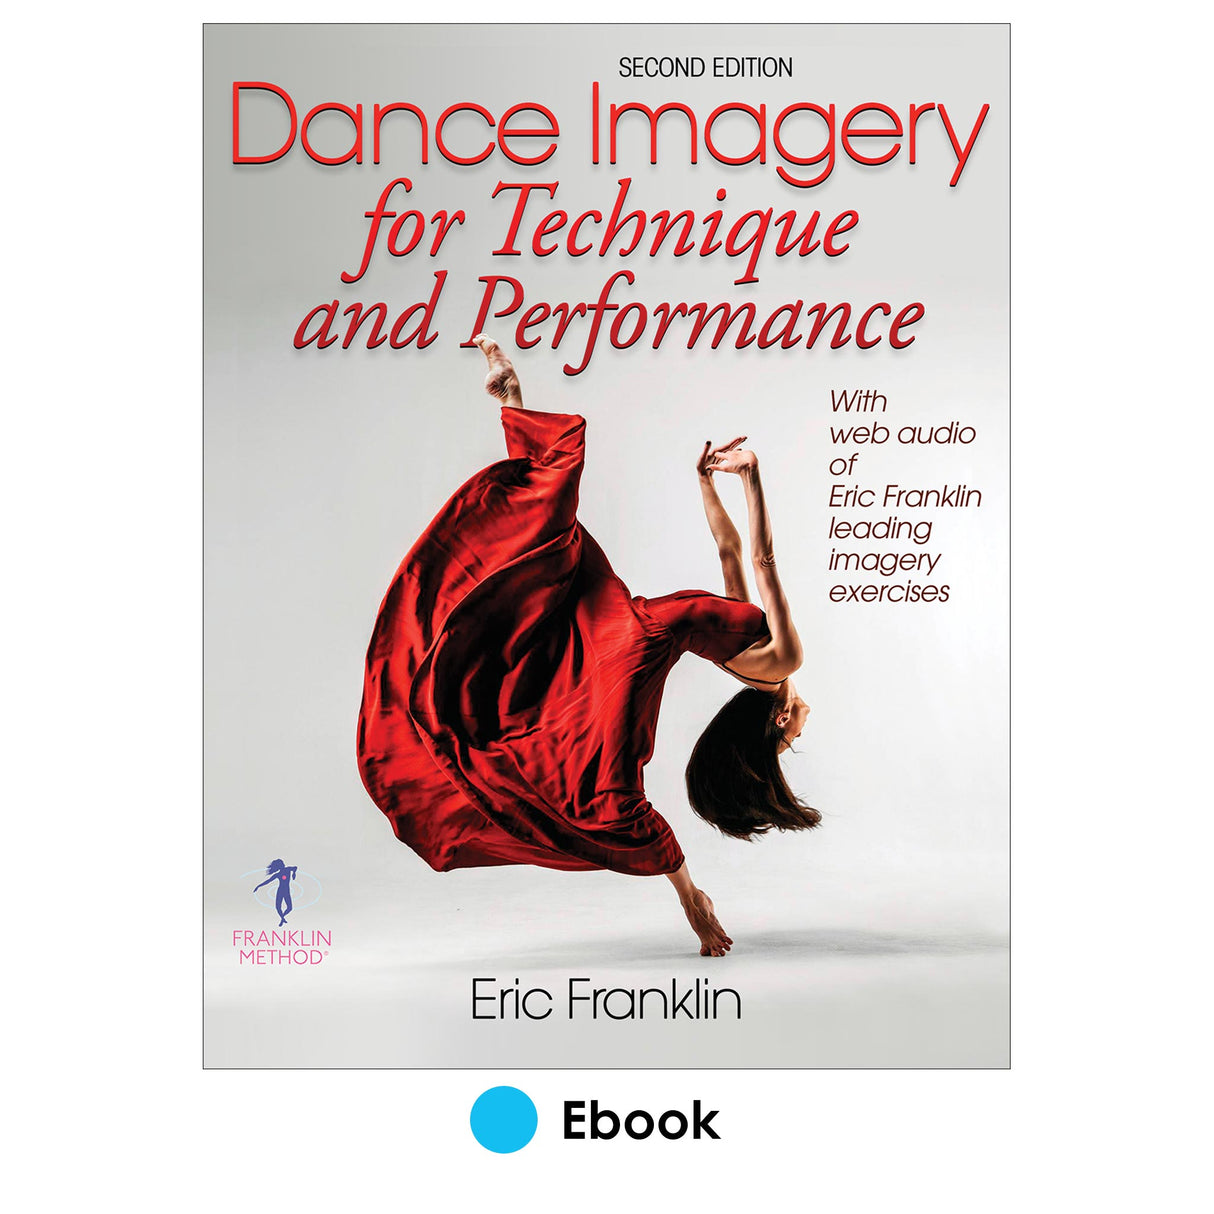 Dance Imagery for Technique and Performance 2nd Edition PDF